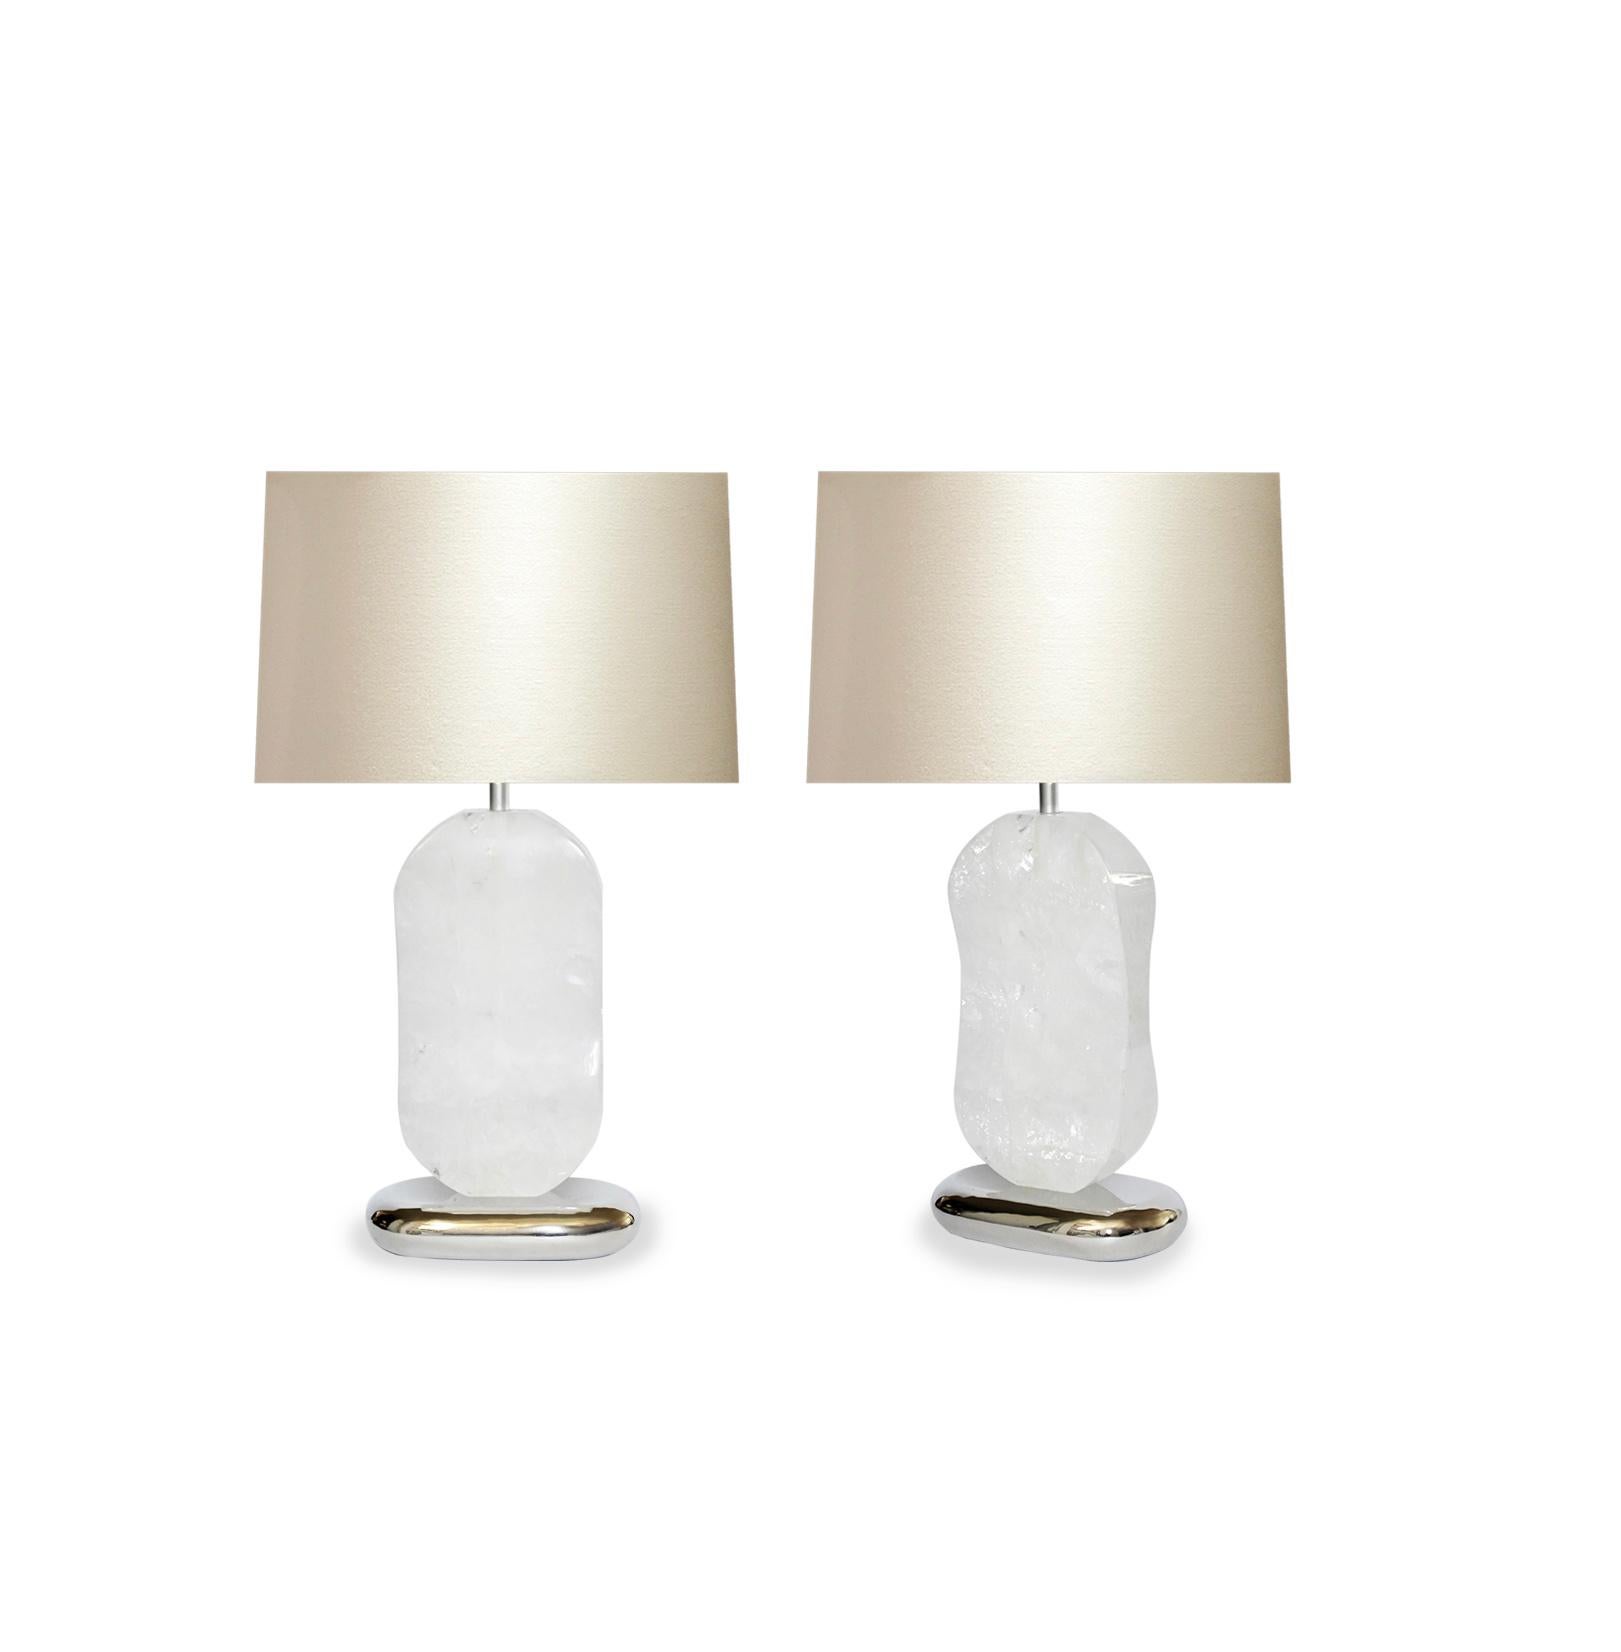 Pair of carved oval form rock crystal quartz lamp with nickel plating bases. Created by Phoenix Gallery, NYC.
Measure: To the top of rock crystal: 14.35